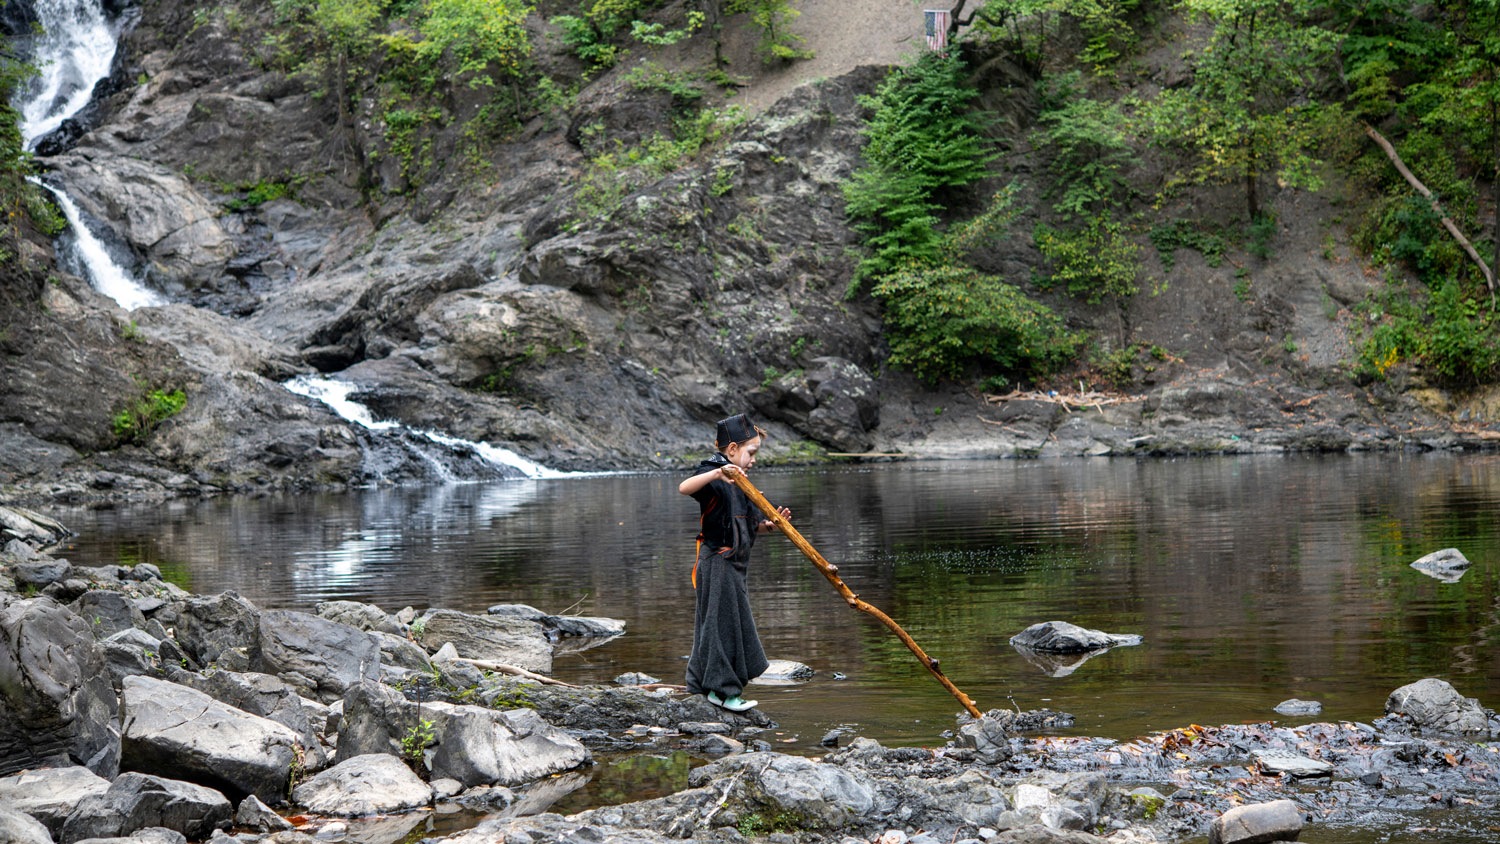 a young boy points a large stick at the rocks at the bottom of a waterfall in a deep gorge.